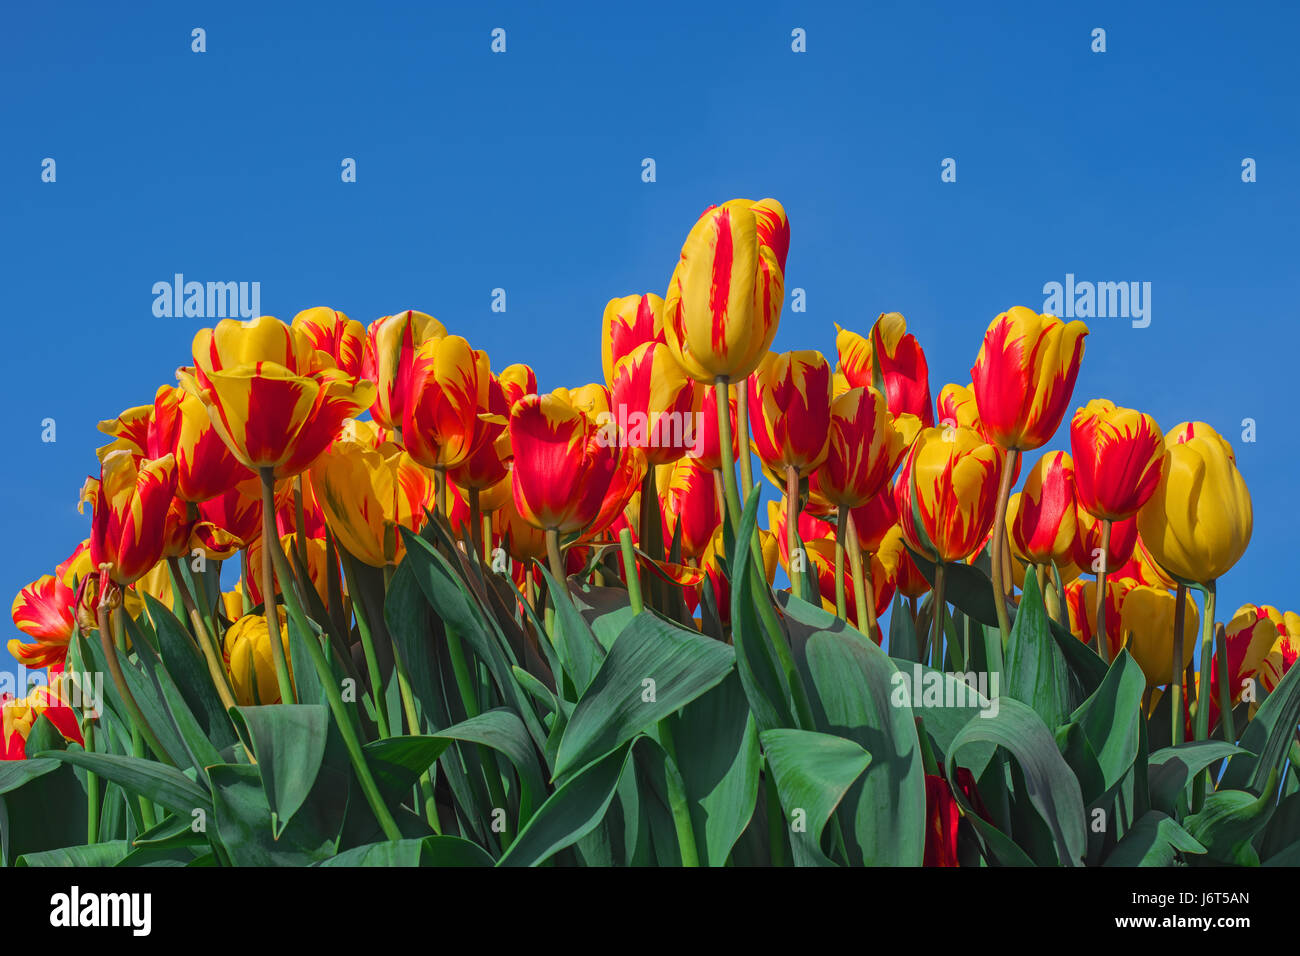 Colorful tulip flowers on blue sky background. Blooming tulips close up, Keukenhof garden, Netherlands, Europe. Spring outdoor scenery. Flower bed in  Stock Photo